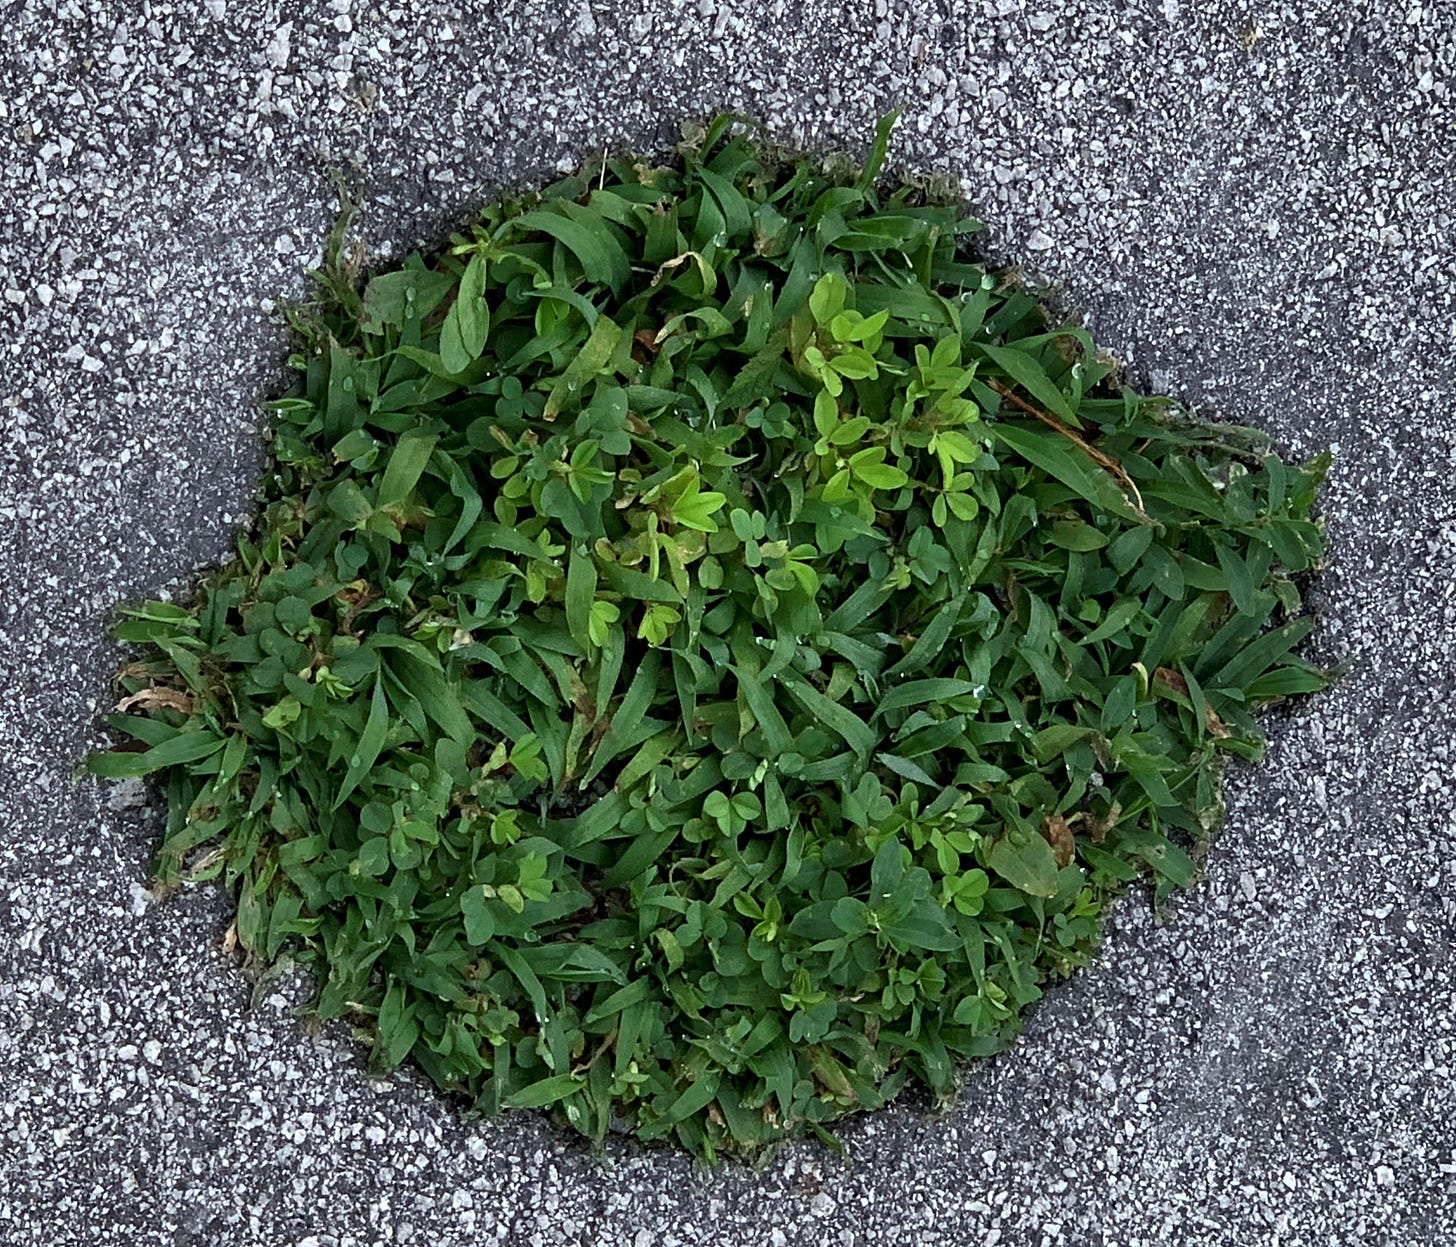 A close-up of a puddle of small green leaves covers a dirt-filled utility access hatch on an asphalt street.